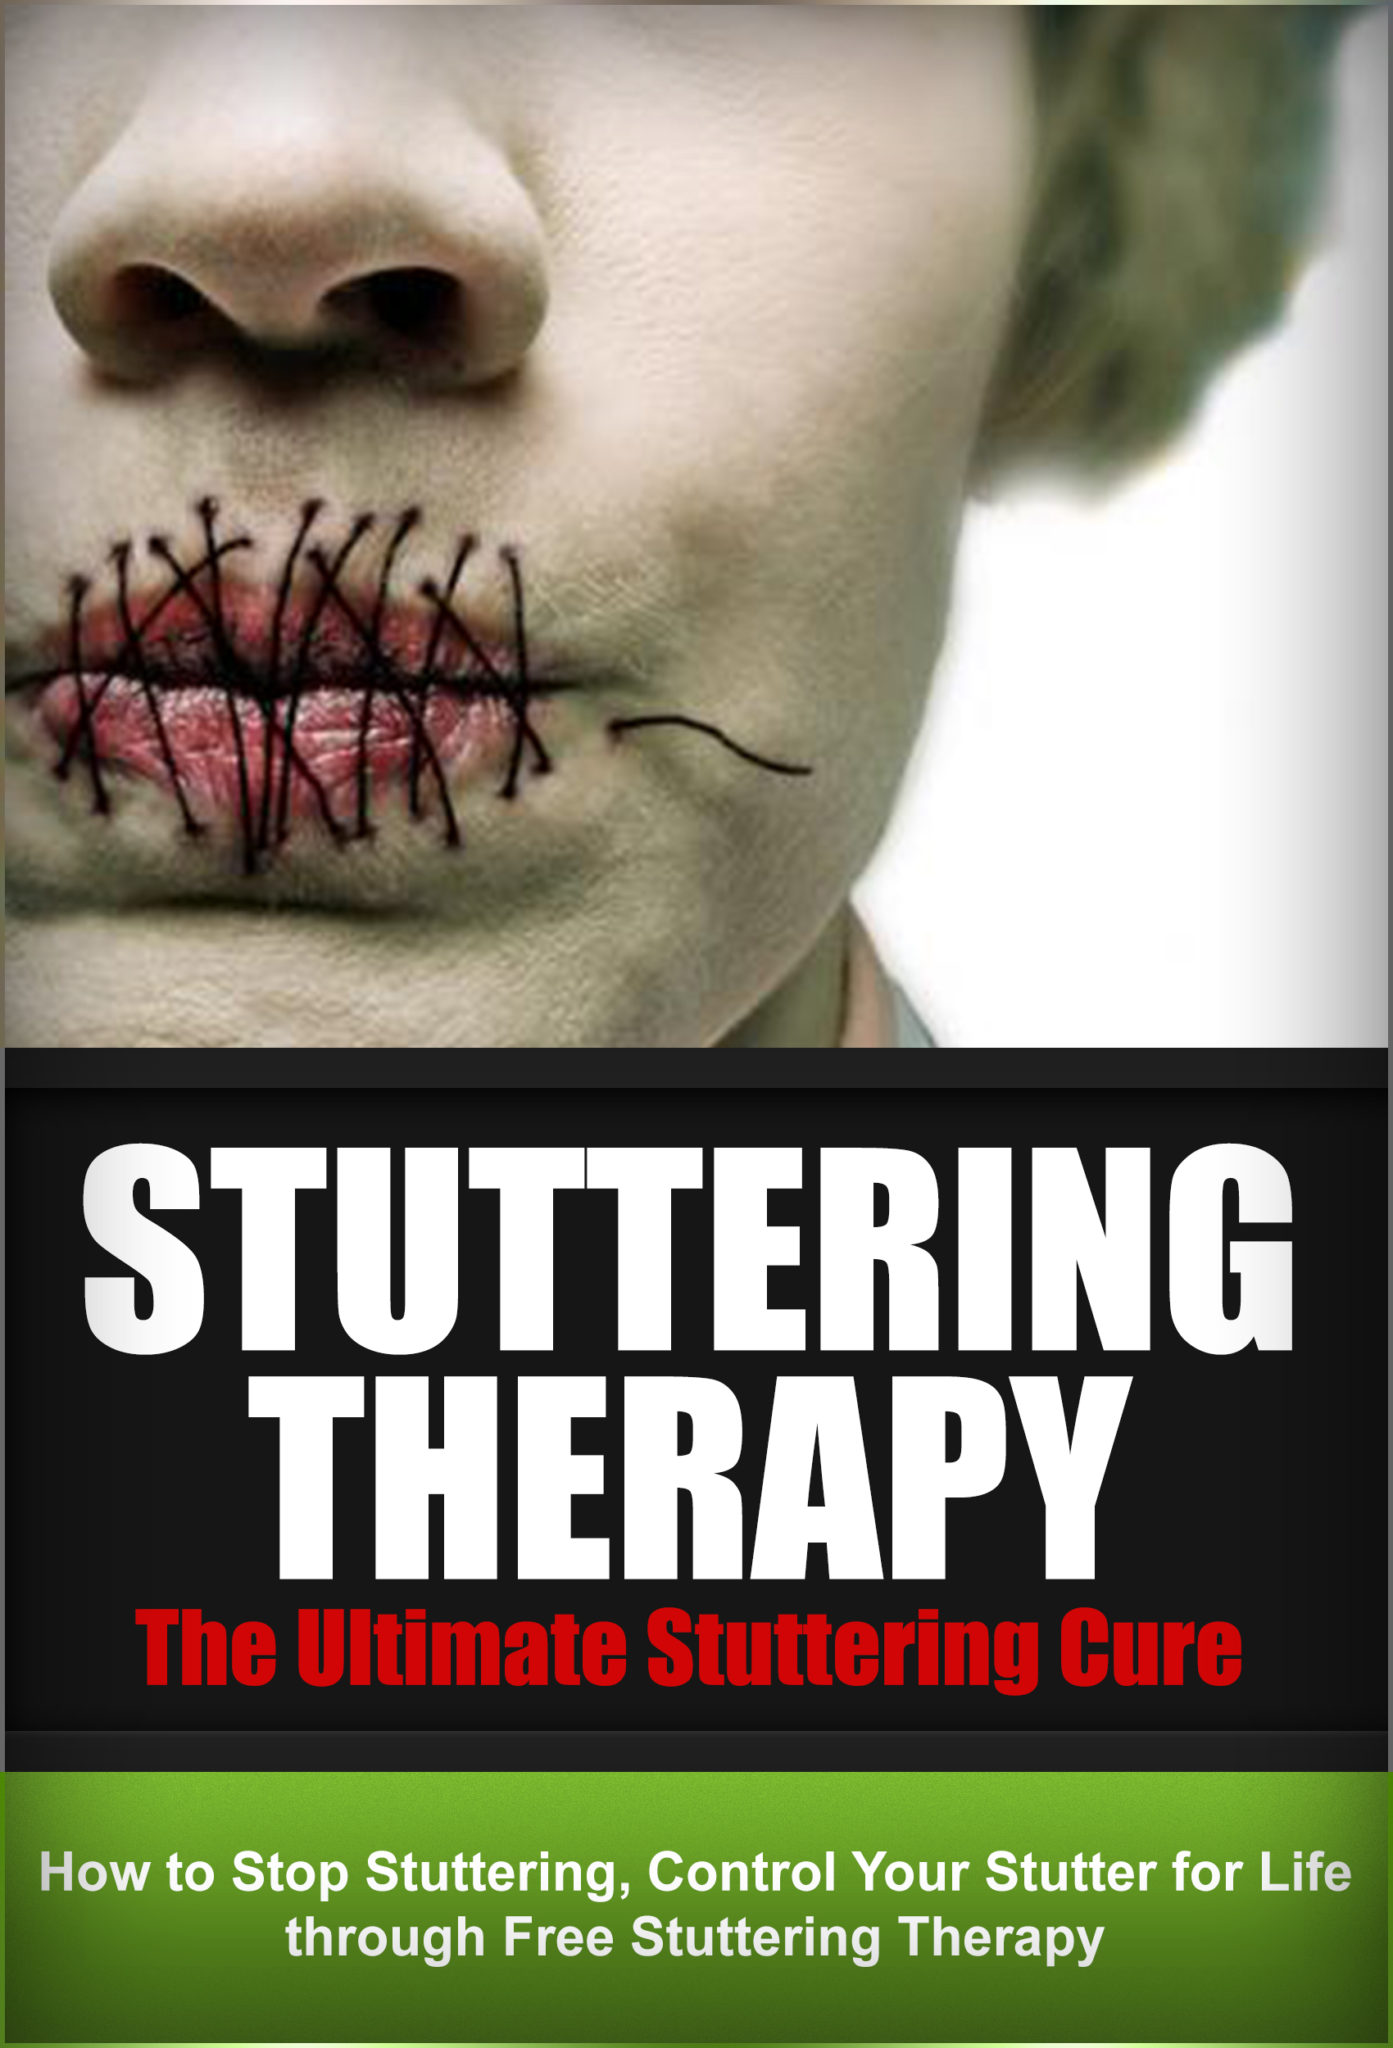 Stuttering Therapy – The Ultimate Stuttering Cure: How To Stop Stuttering, Control Your Stutter For Life Through Free Stuttering Therapy by Daniel Snow